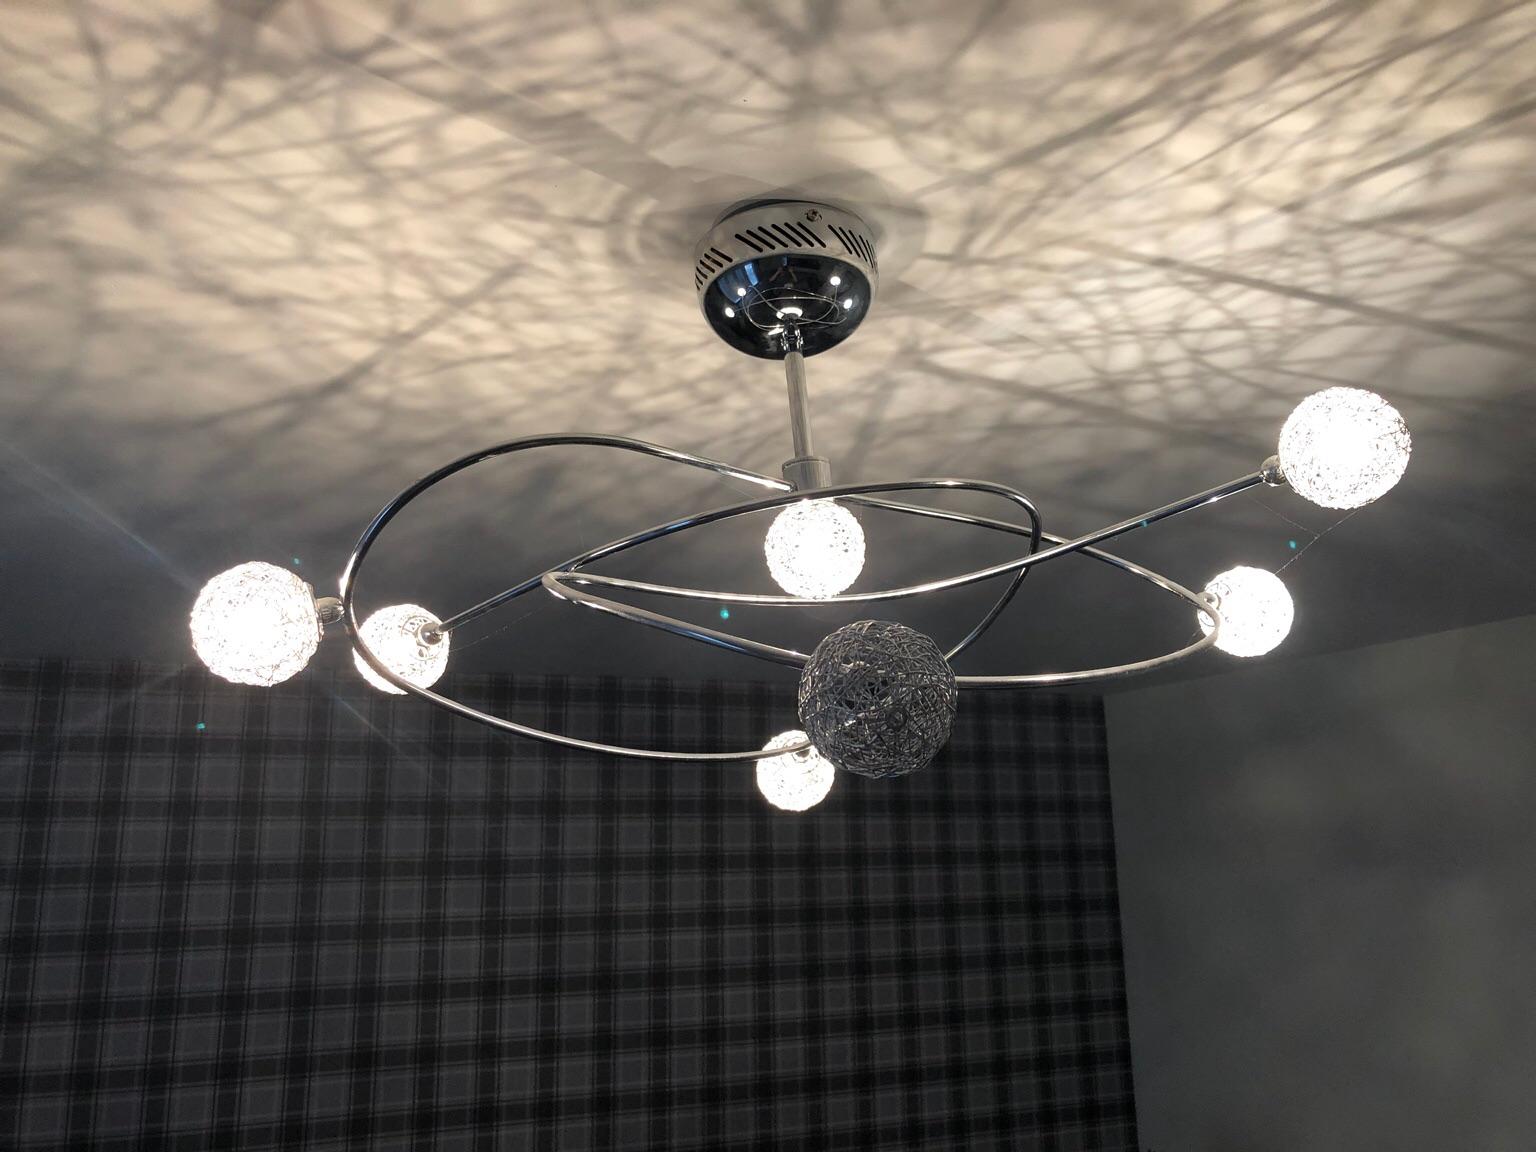 Chrome Wire Mesh Ceiling Light B Q In Trimdon Colliery For 15 00